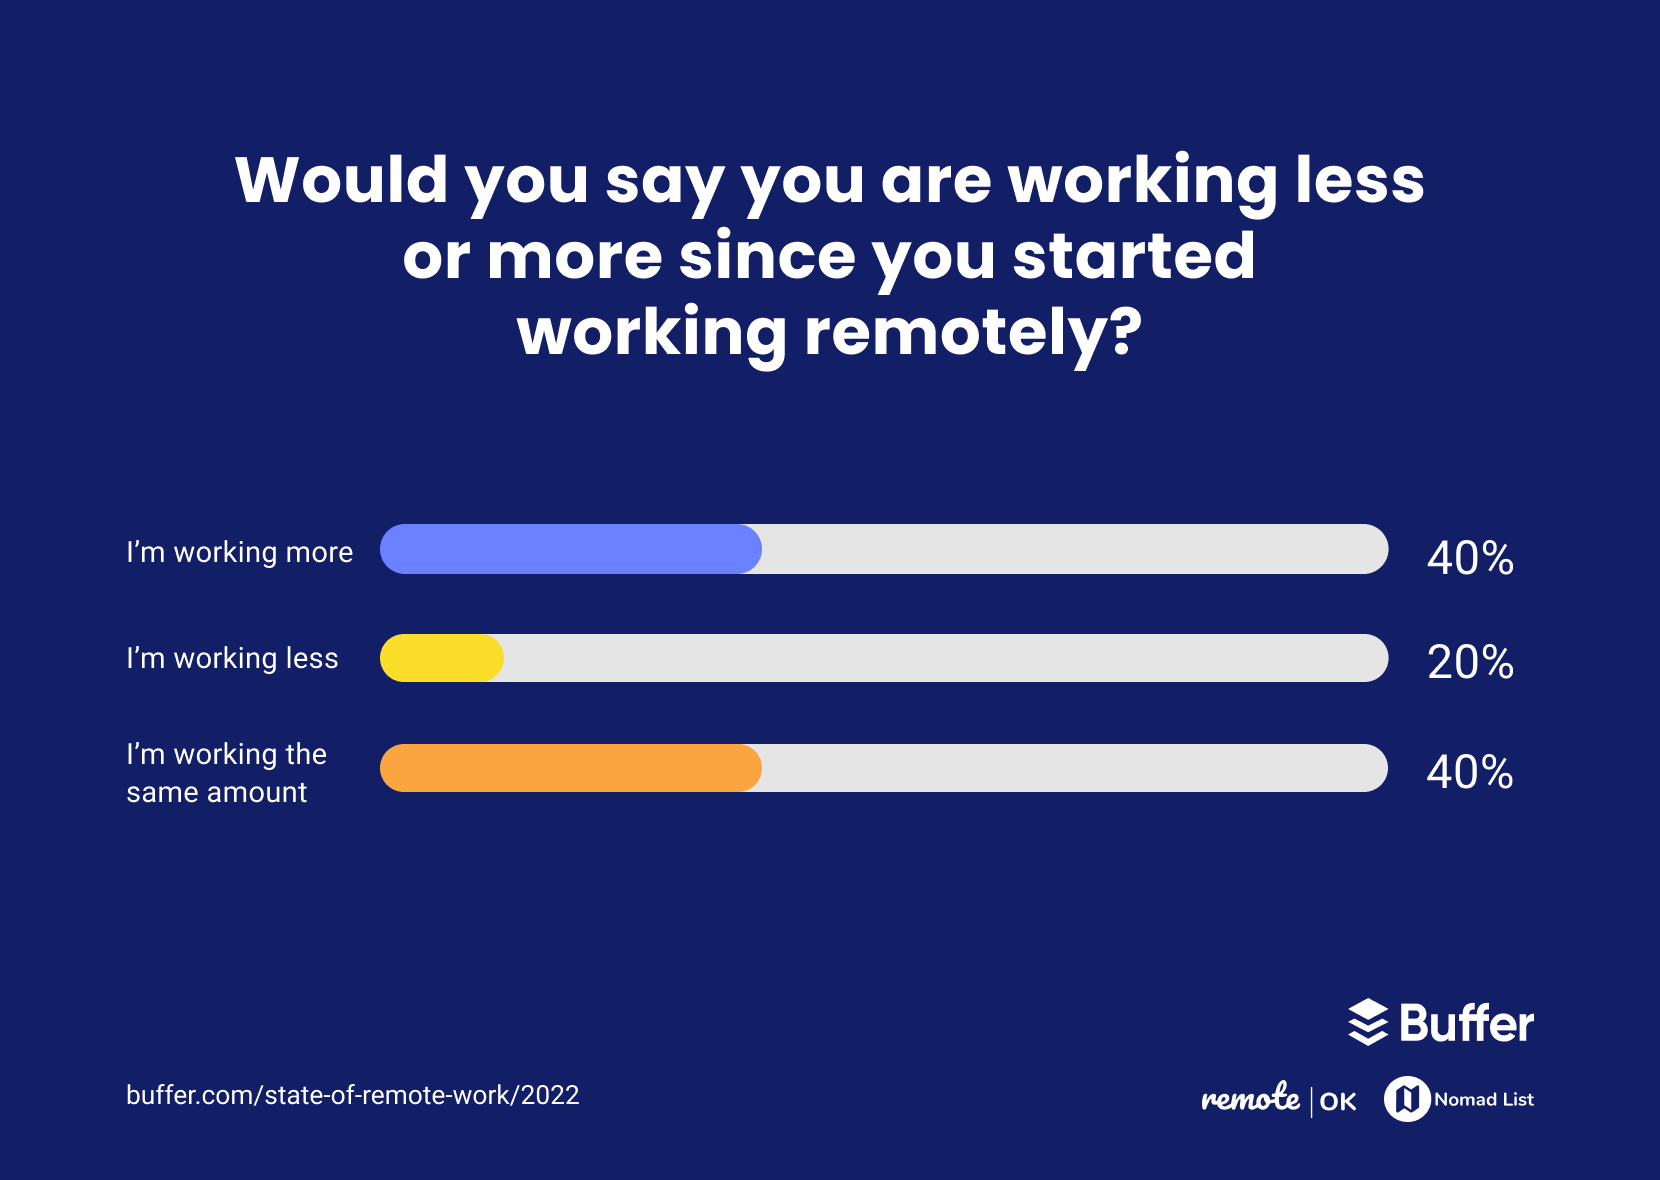 Would you say you are working less or more since you started working remotely?